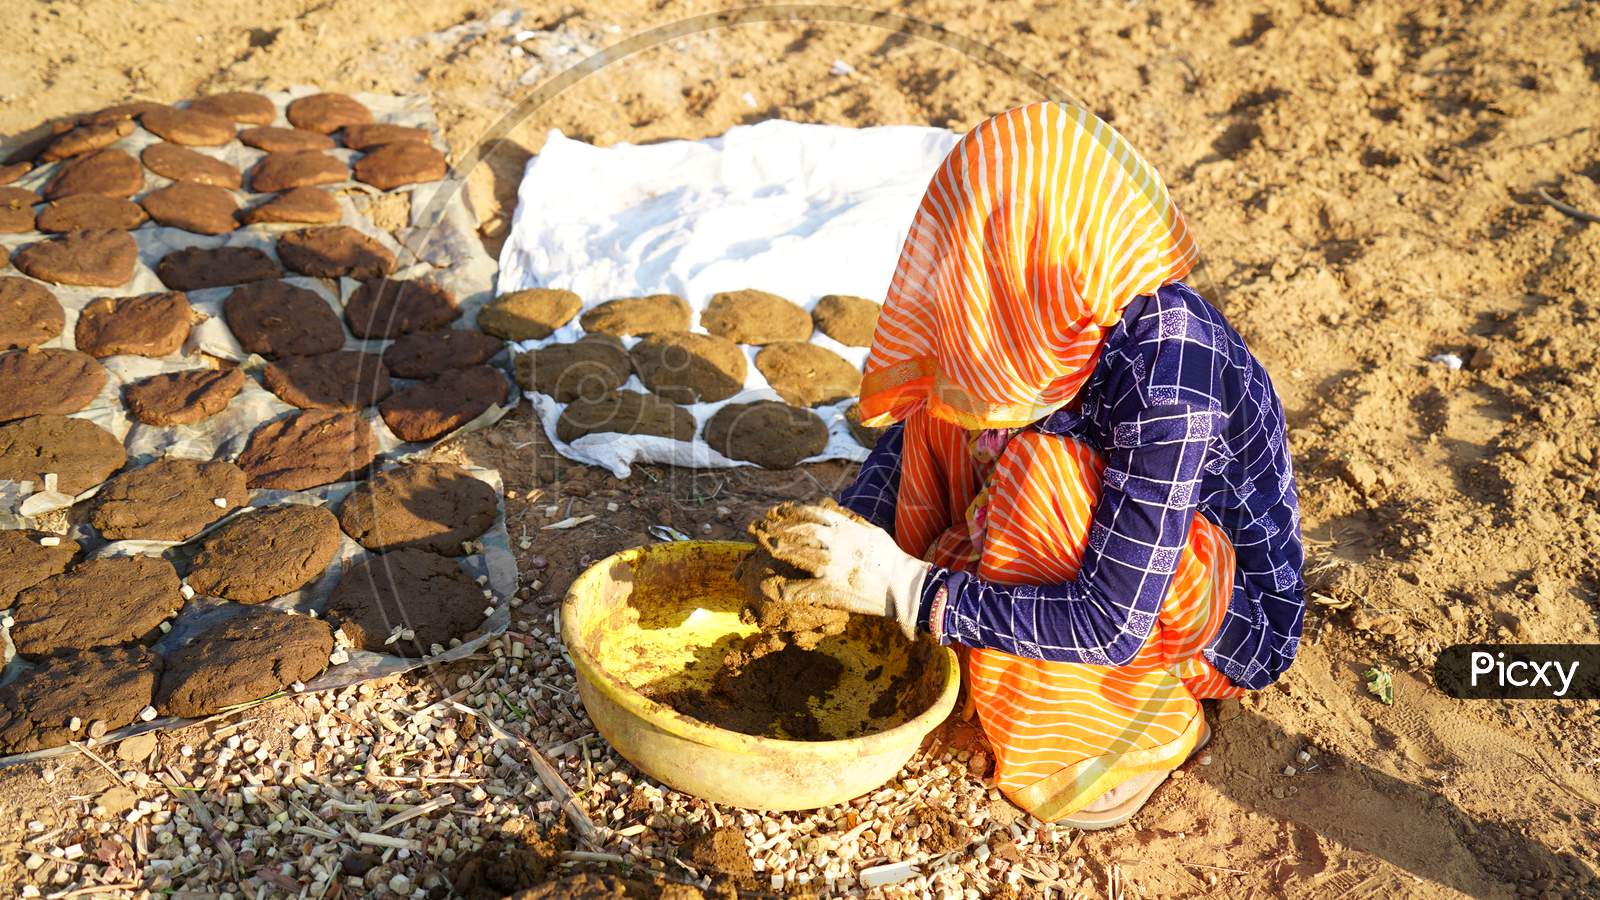 Indian Woman Preparing Cow Dung And Making Dung Cakes For Sacred Festivals. Religious Culture To Make Cow Dung Cakes On Holi Festival In Hindu Religion.